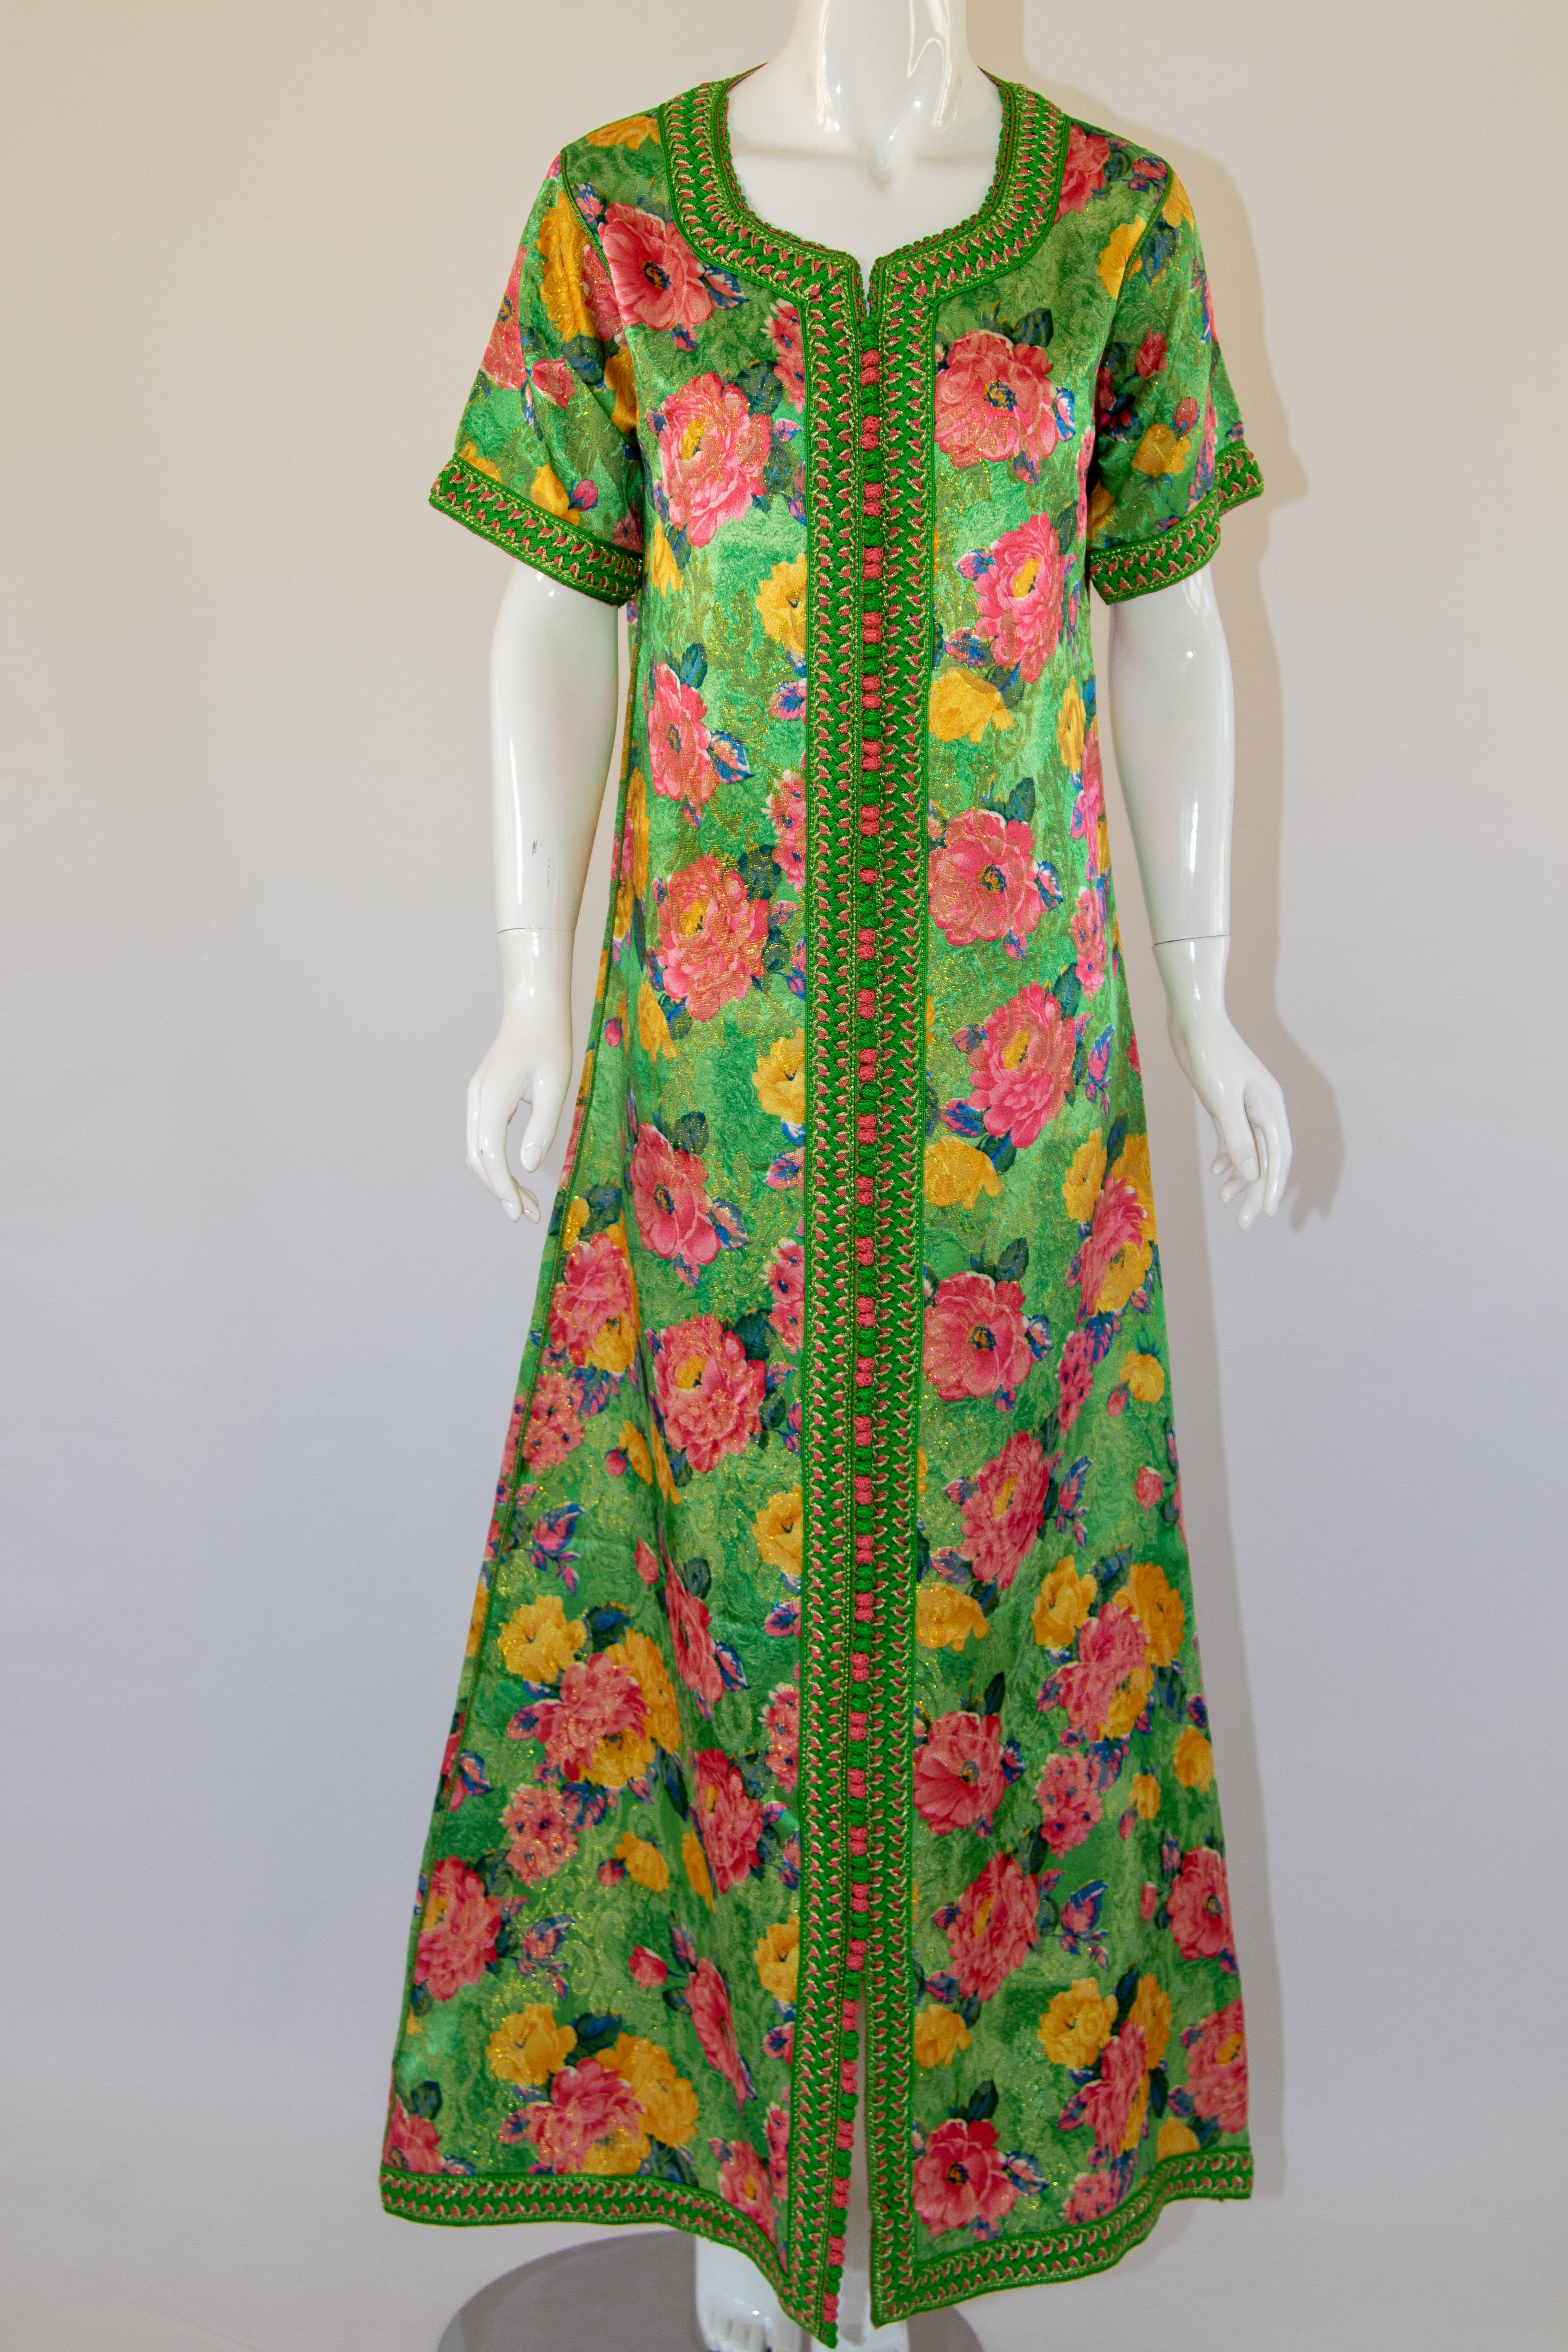 Moroccan exotic floral green caftan gown, circa 1970s.
The front of this caftan is embellished with woven green and pink buttons and loops that run down the centre to the hemline.
Short sleeves great for hot summer vacation, great large flowers in